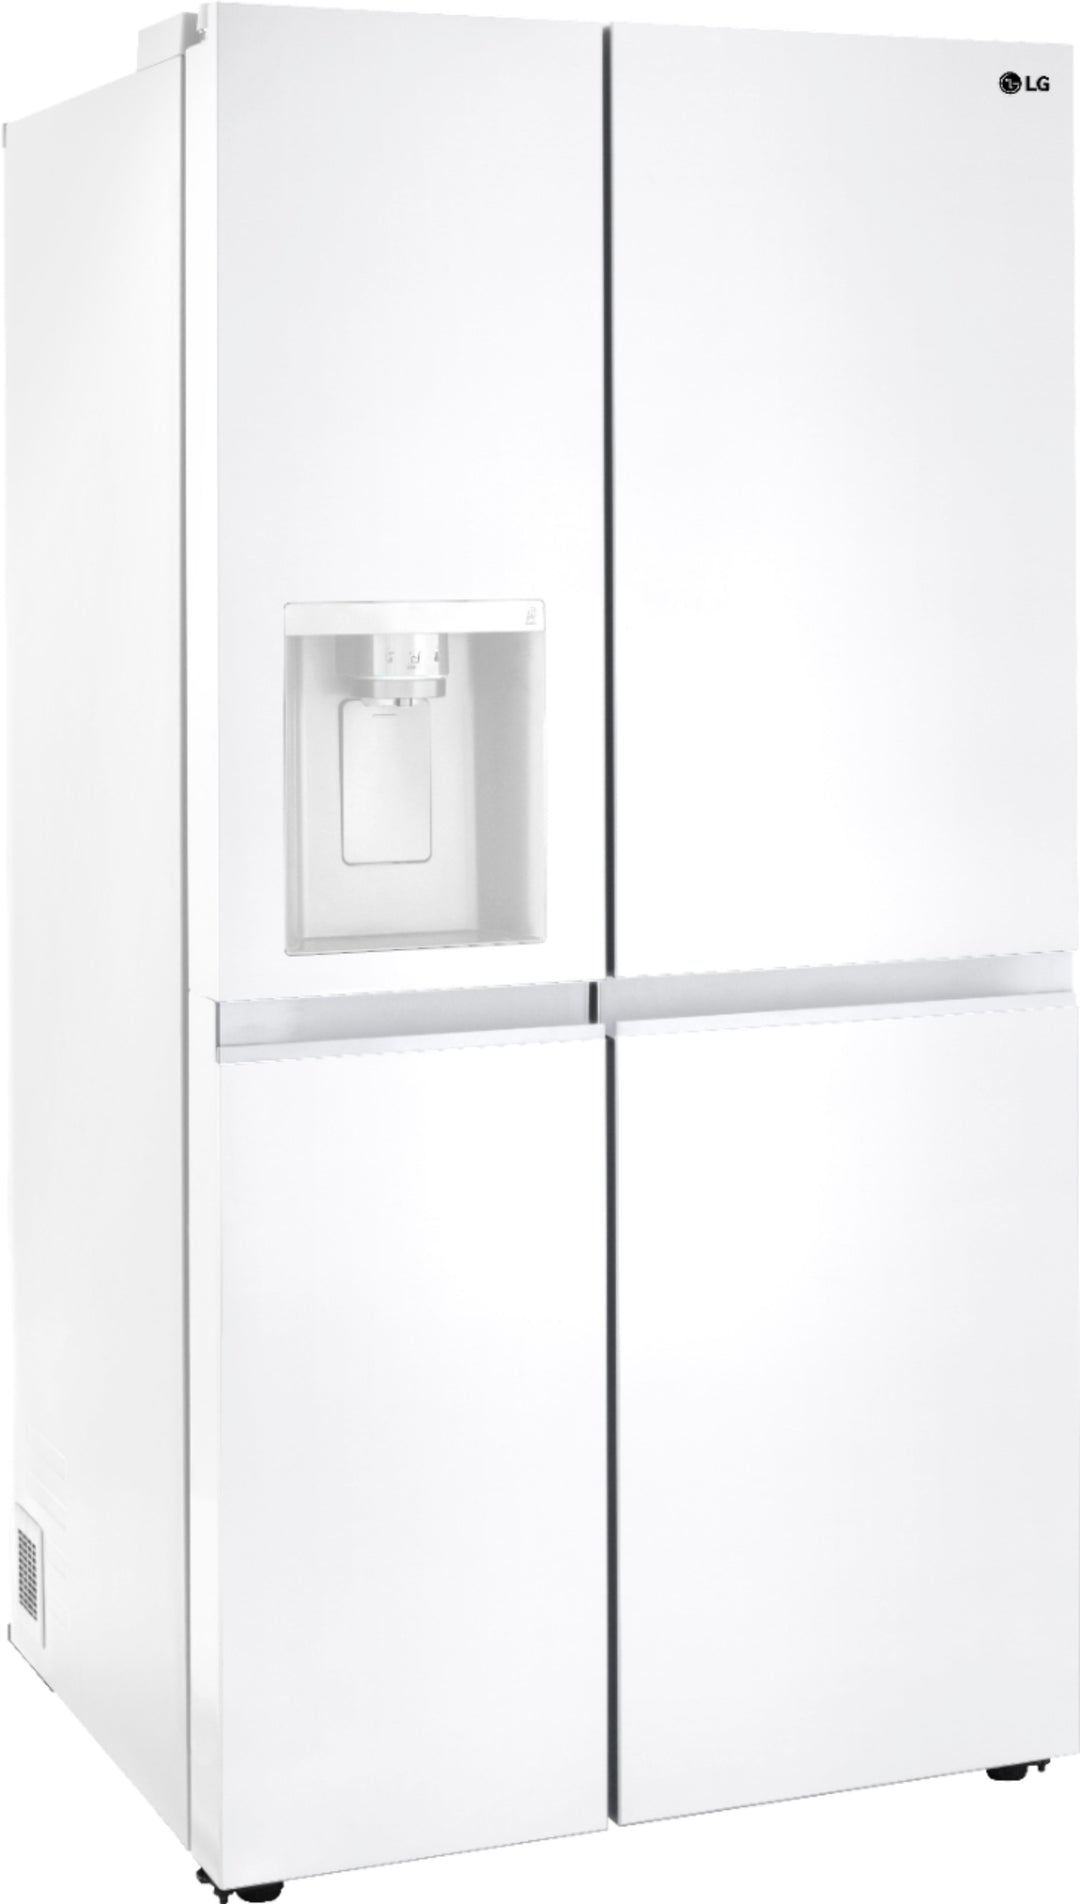 LG - 27.2 cu ft Side by Side Refrigerator with SpacePlus Ice - Smooth white_12